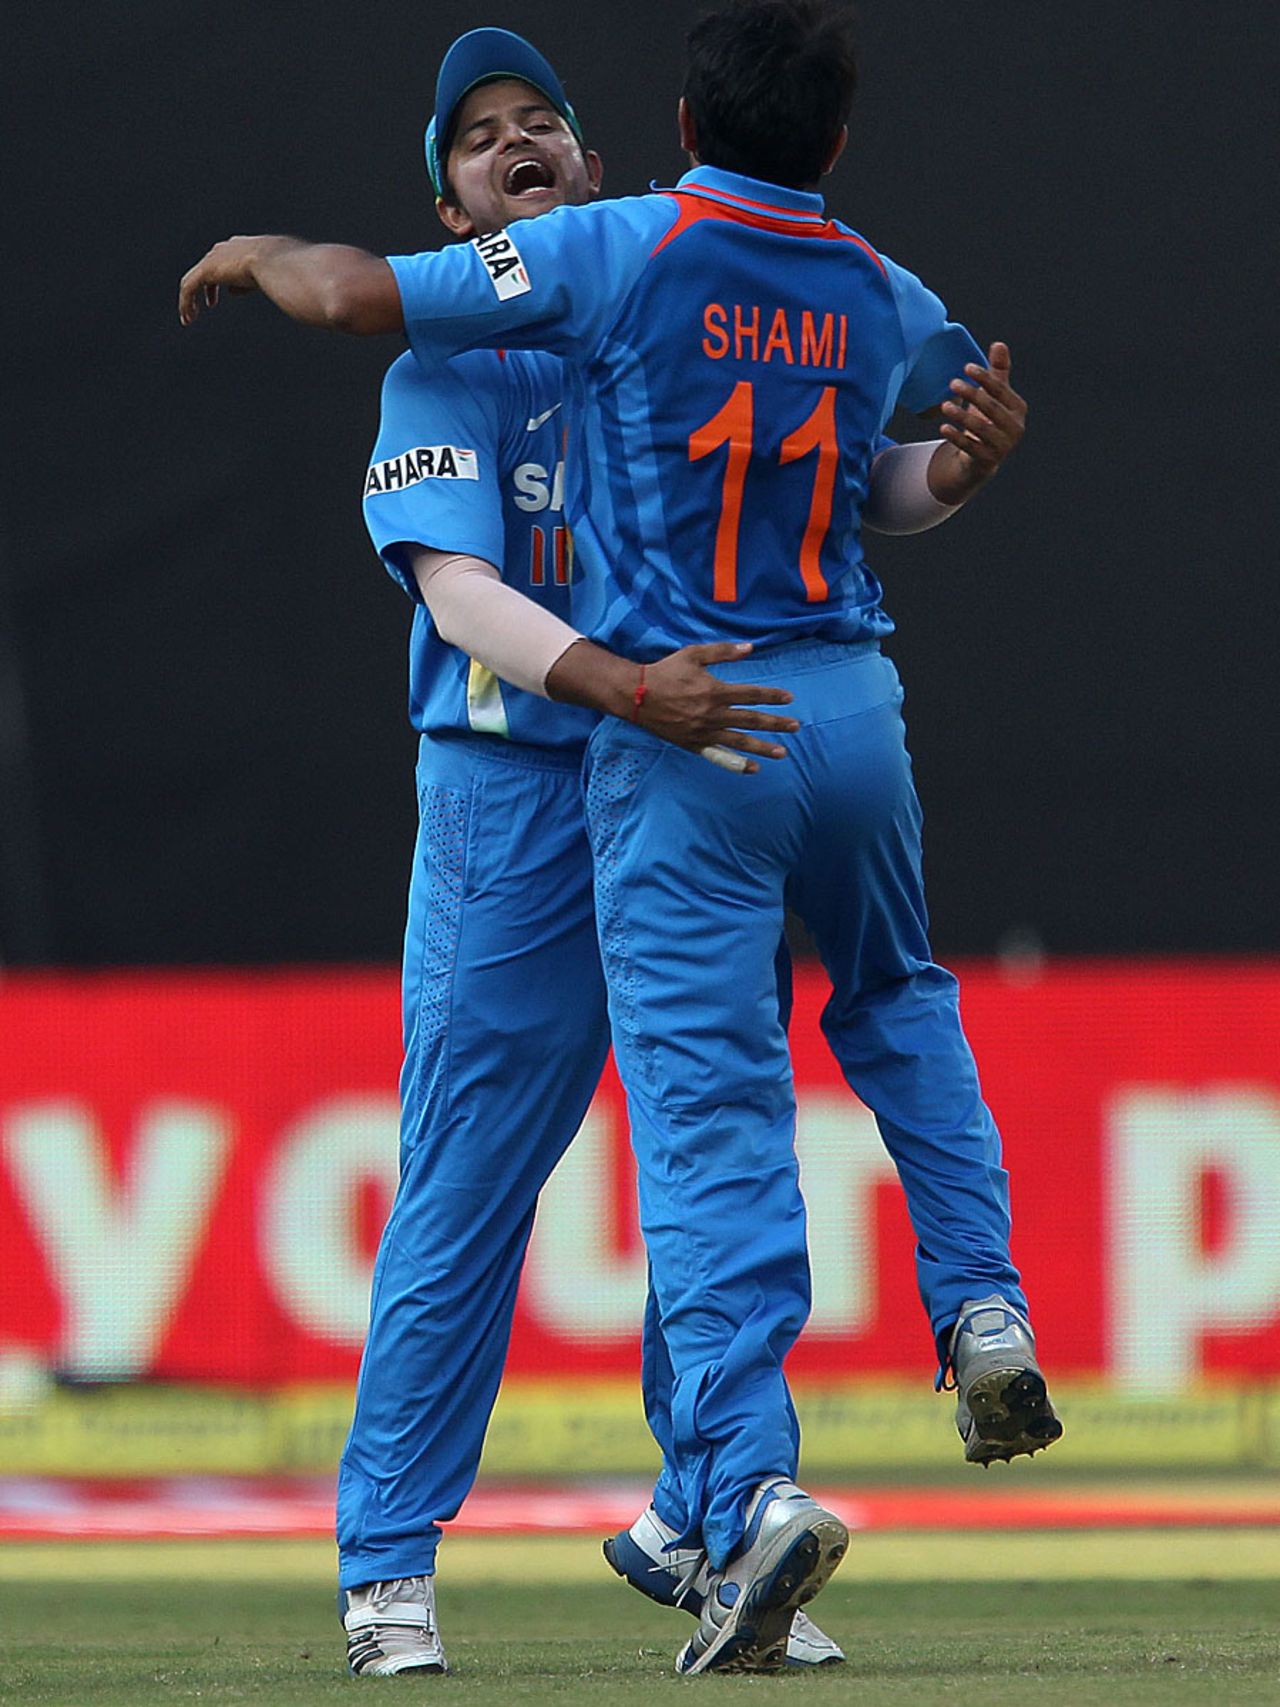 Shami Ahmed dismissed Ian Bell in the second over of England's chase, India v England, 2nd ODI, Kochi, January 15, 2013